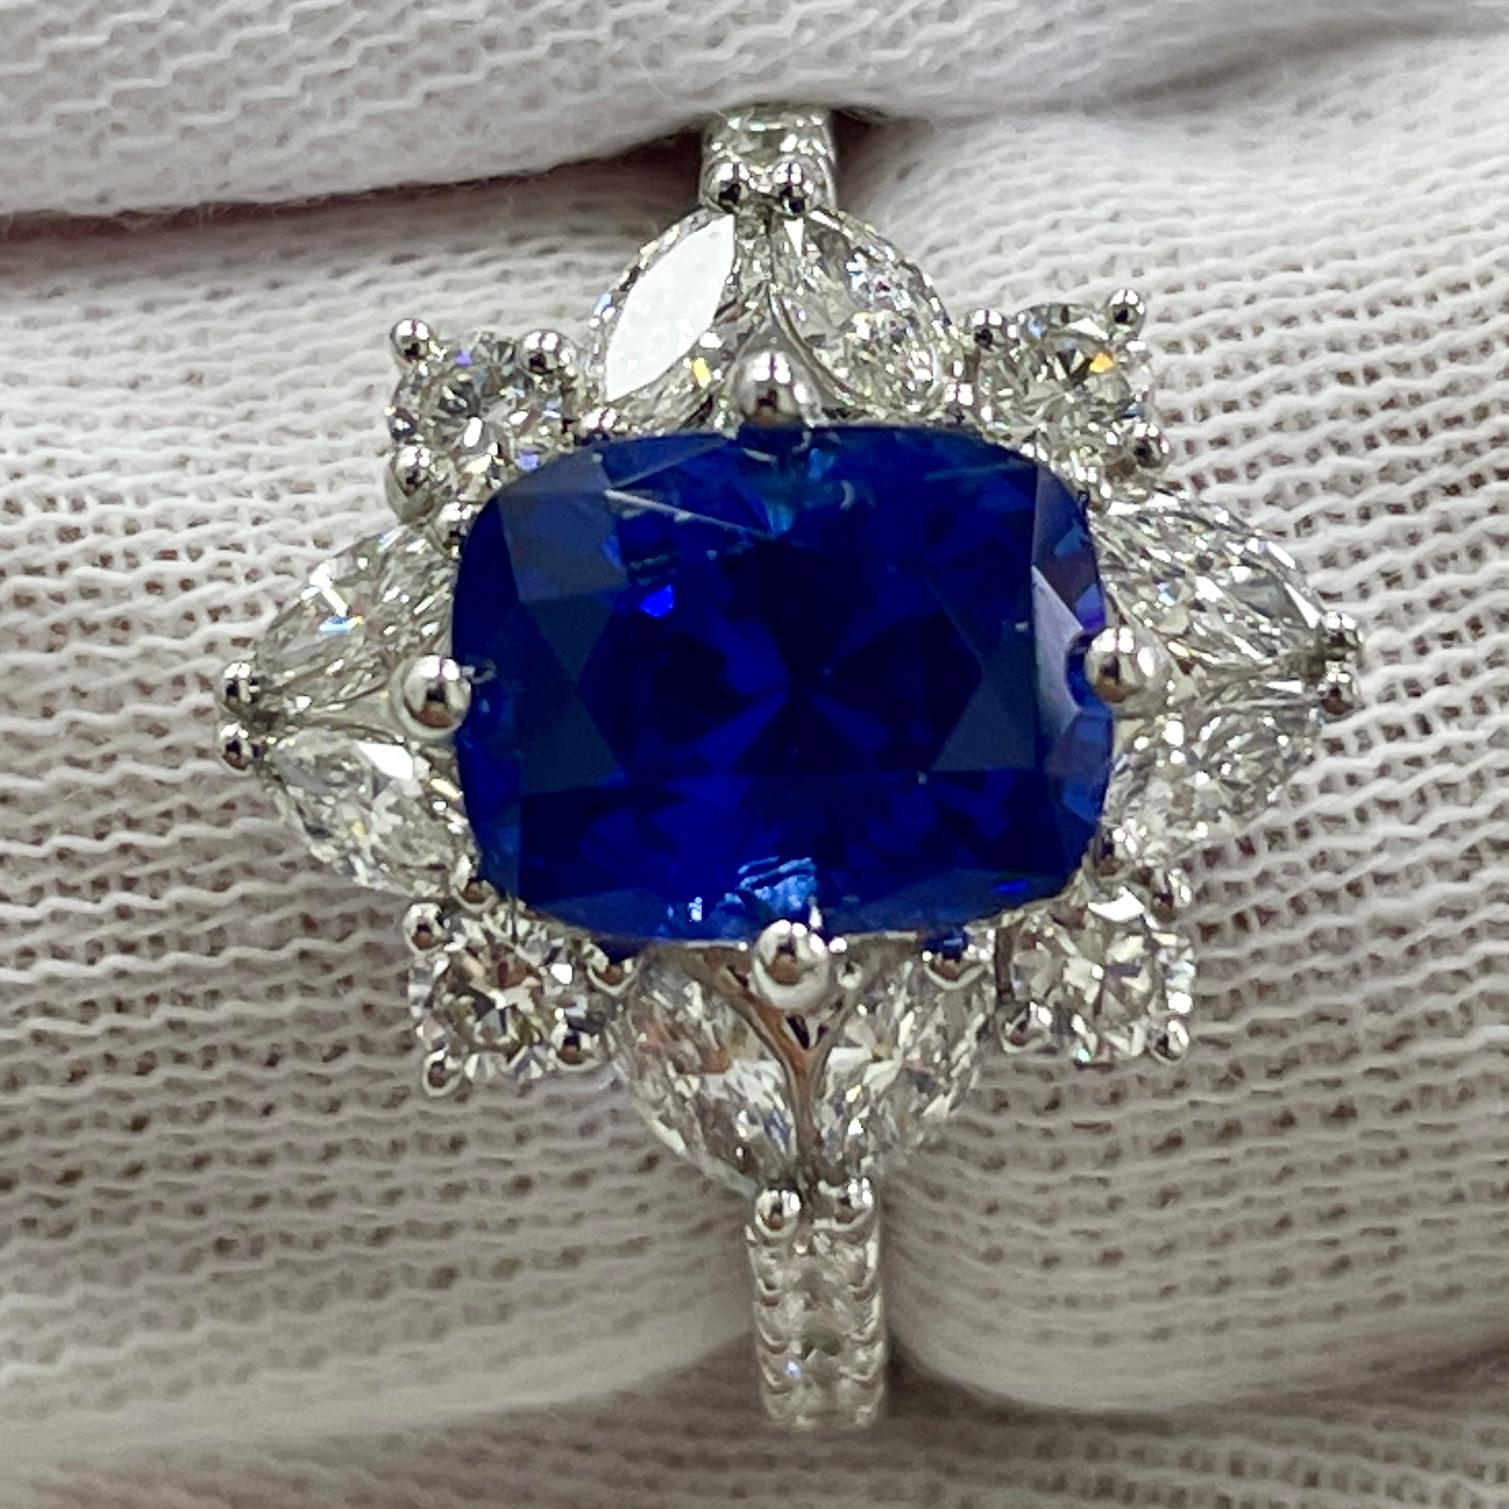 This is a LOVELY sapphire with a very lively color, mounted in an elegant 18K white gold and diamond ring with 0.93carats of brilliant white diamonds. Suitable for any occasion!